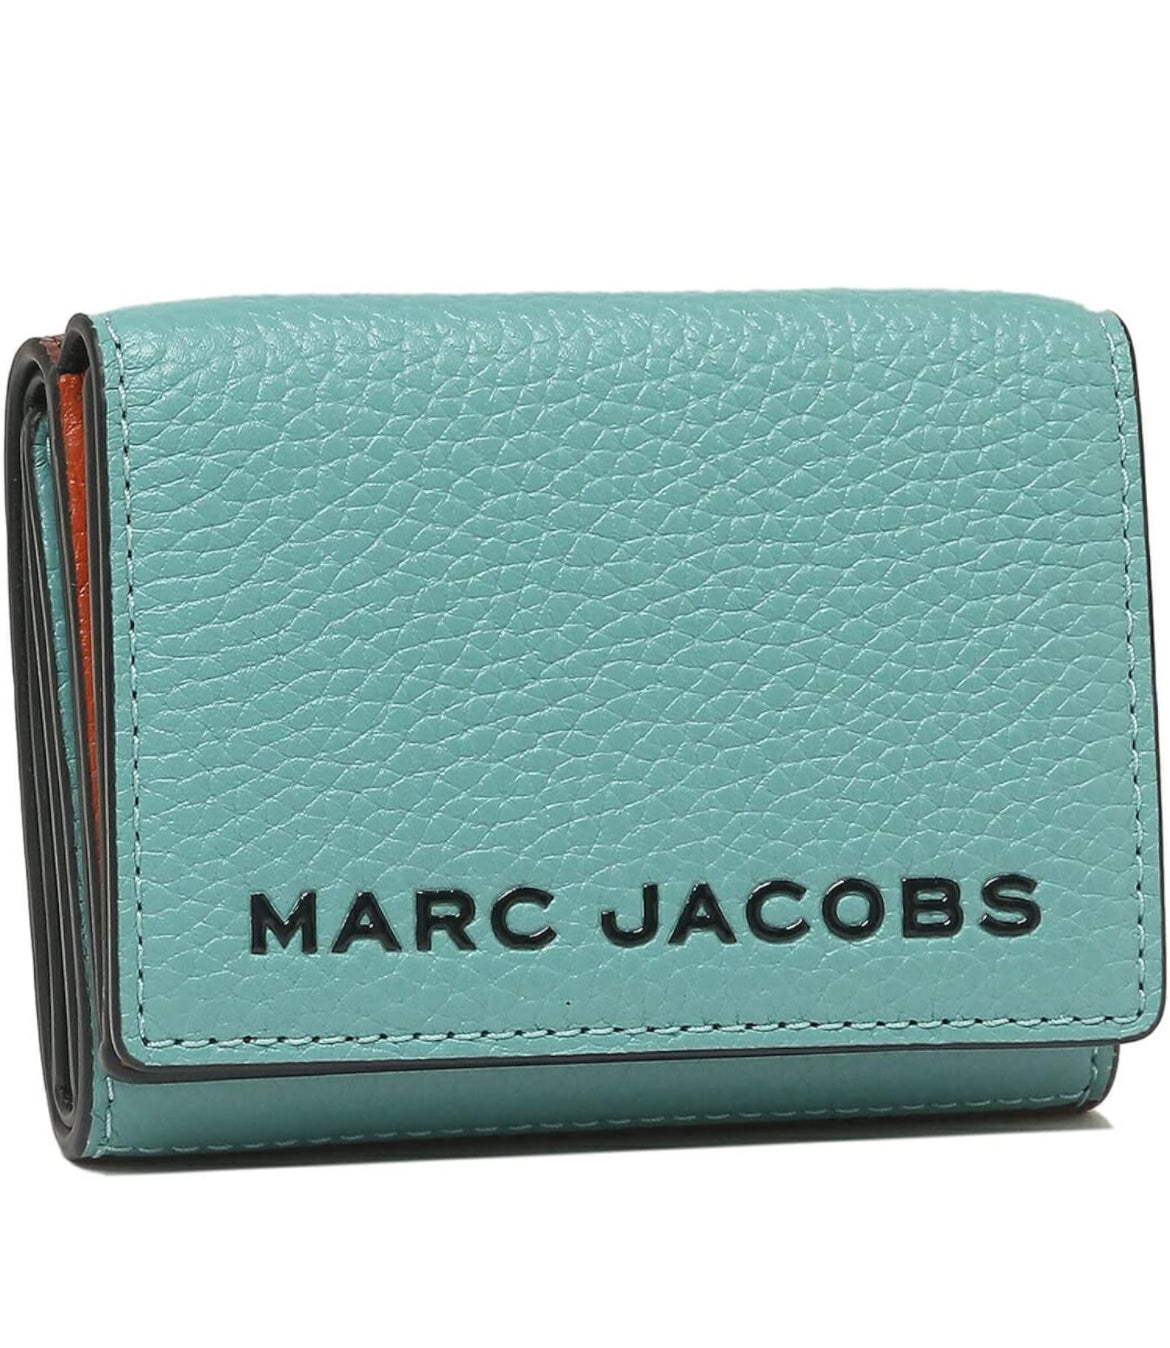 Marco Jacobs Trifold wallets